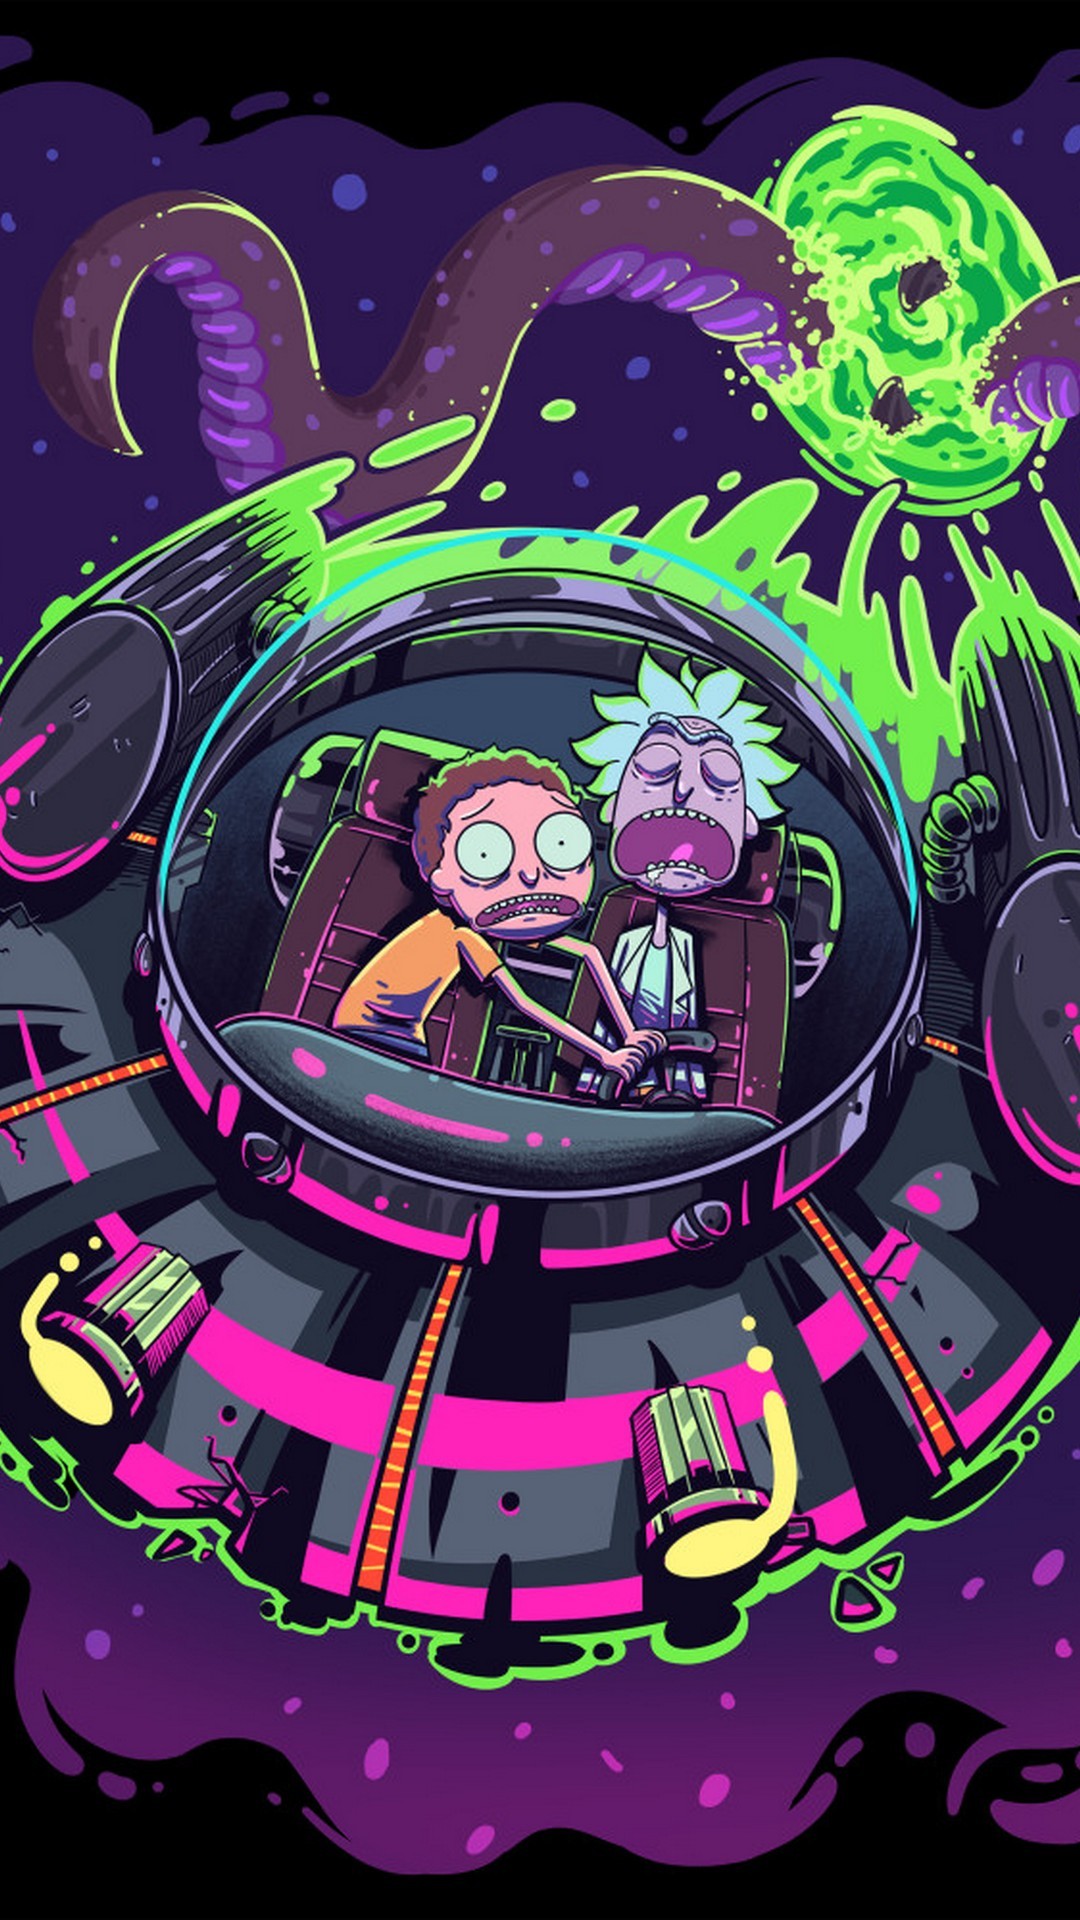 iPhone Wallpaper HD Rick and Morty with image resolution 1080x1920 pixel. You can use this wallpaper as background for your desktop Computer Screensavers, Android or iPhone smartphones